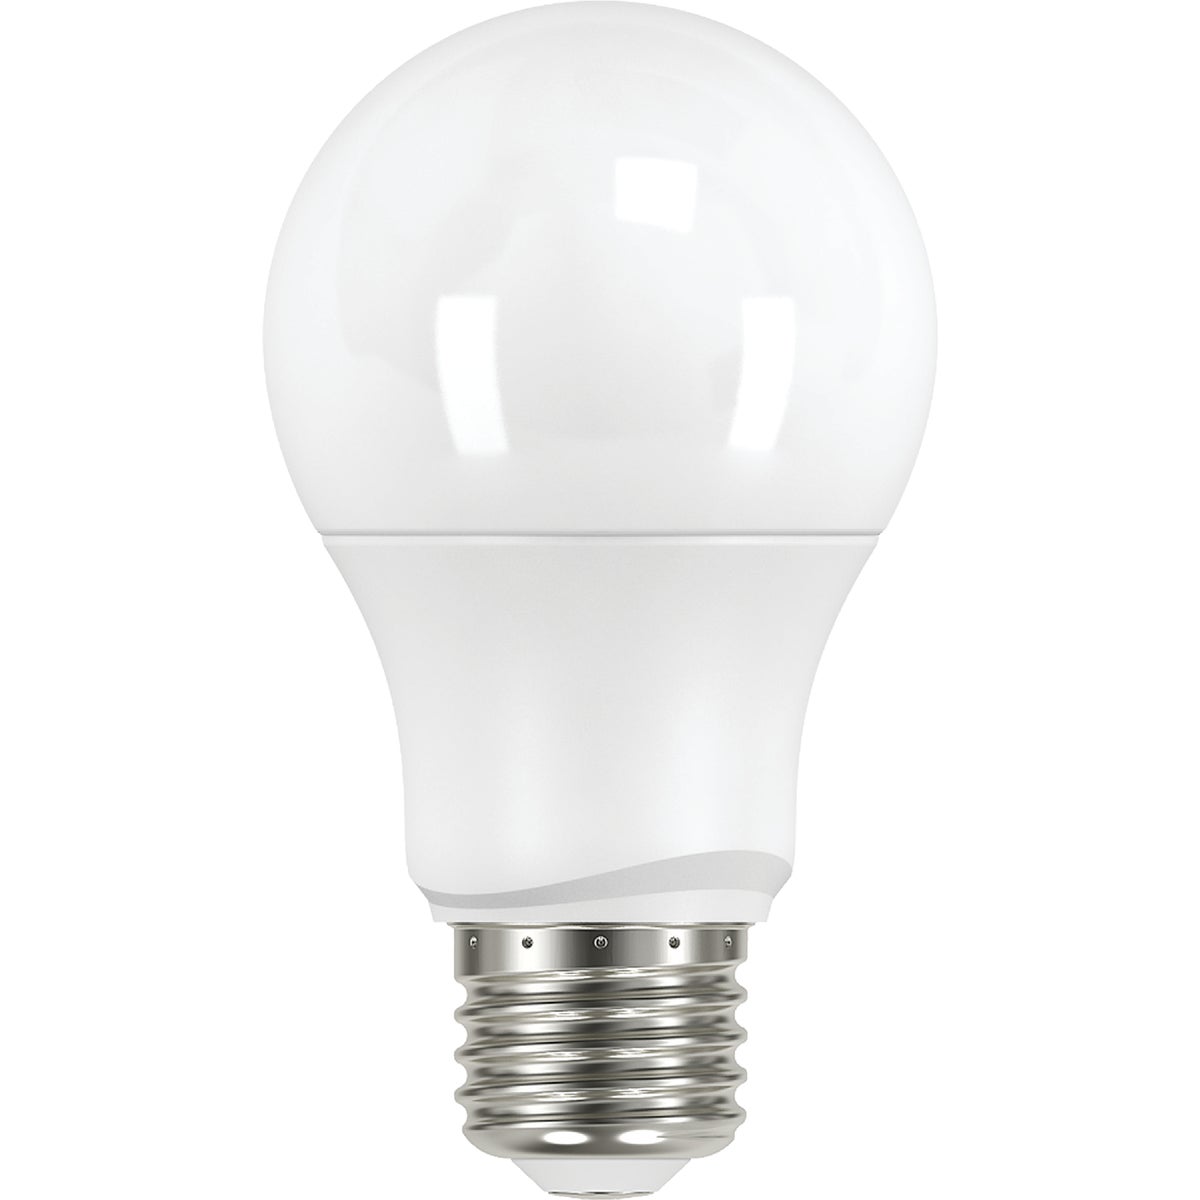 Item 501922, Non-dimmable, solid state LED (light emitting diode) light bulb with medium